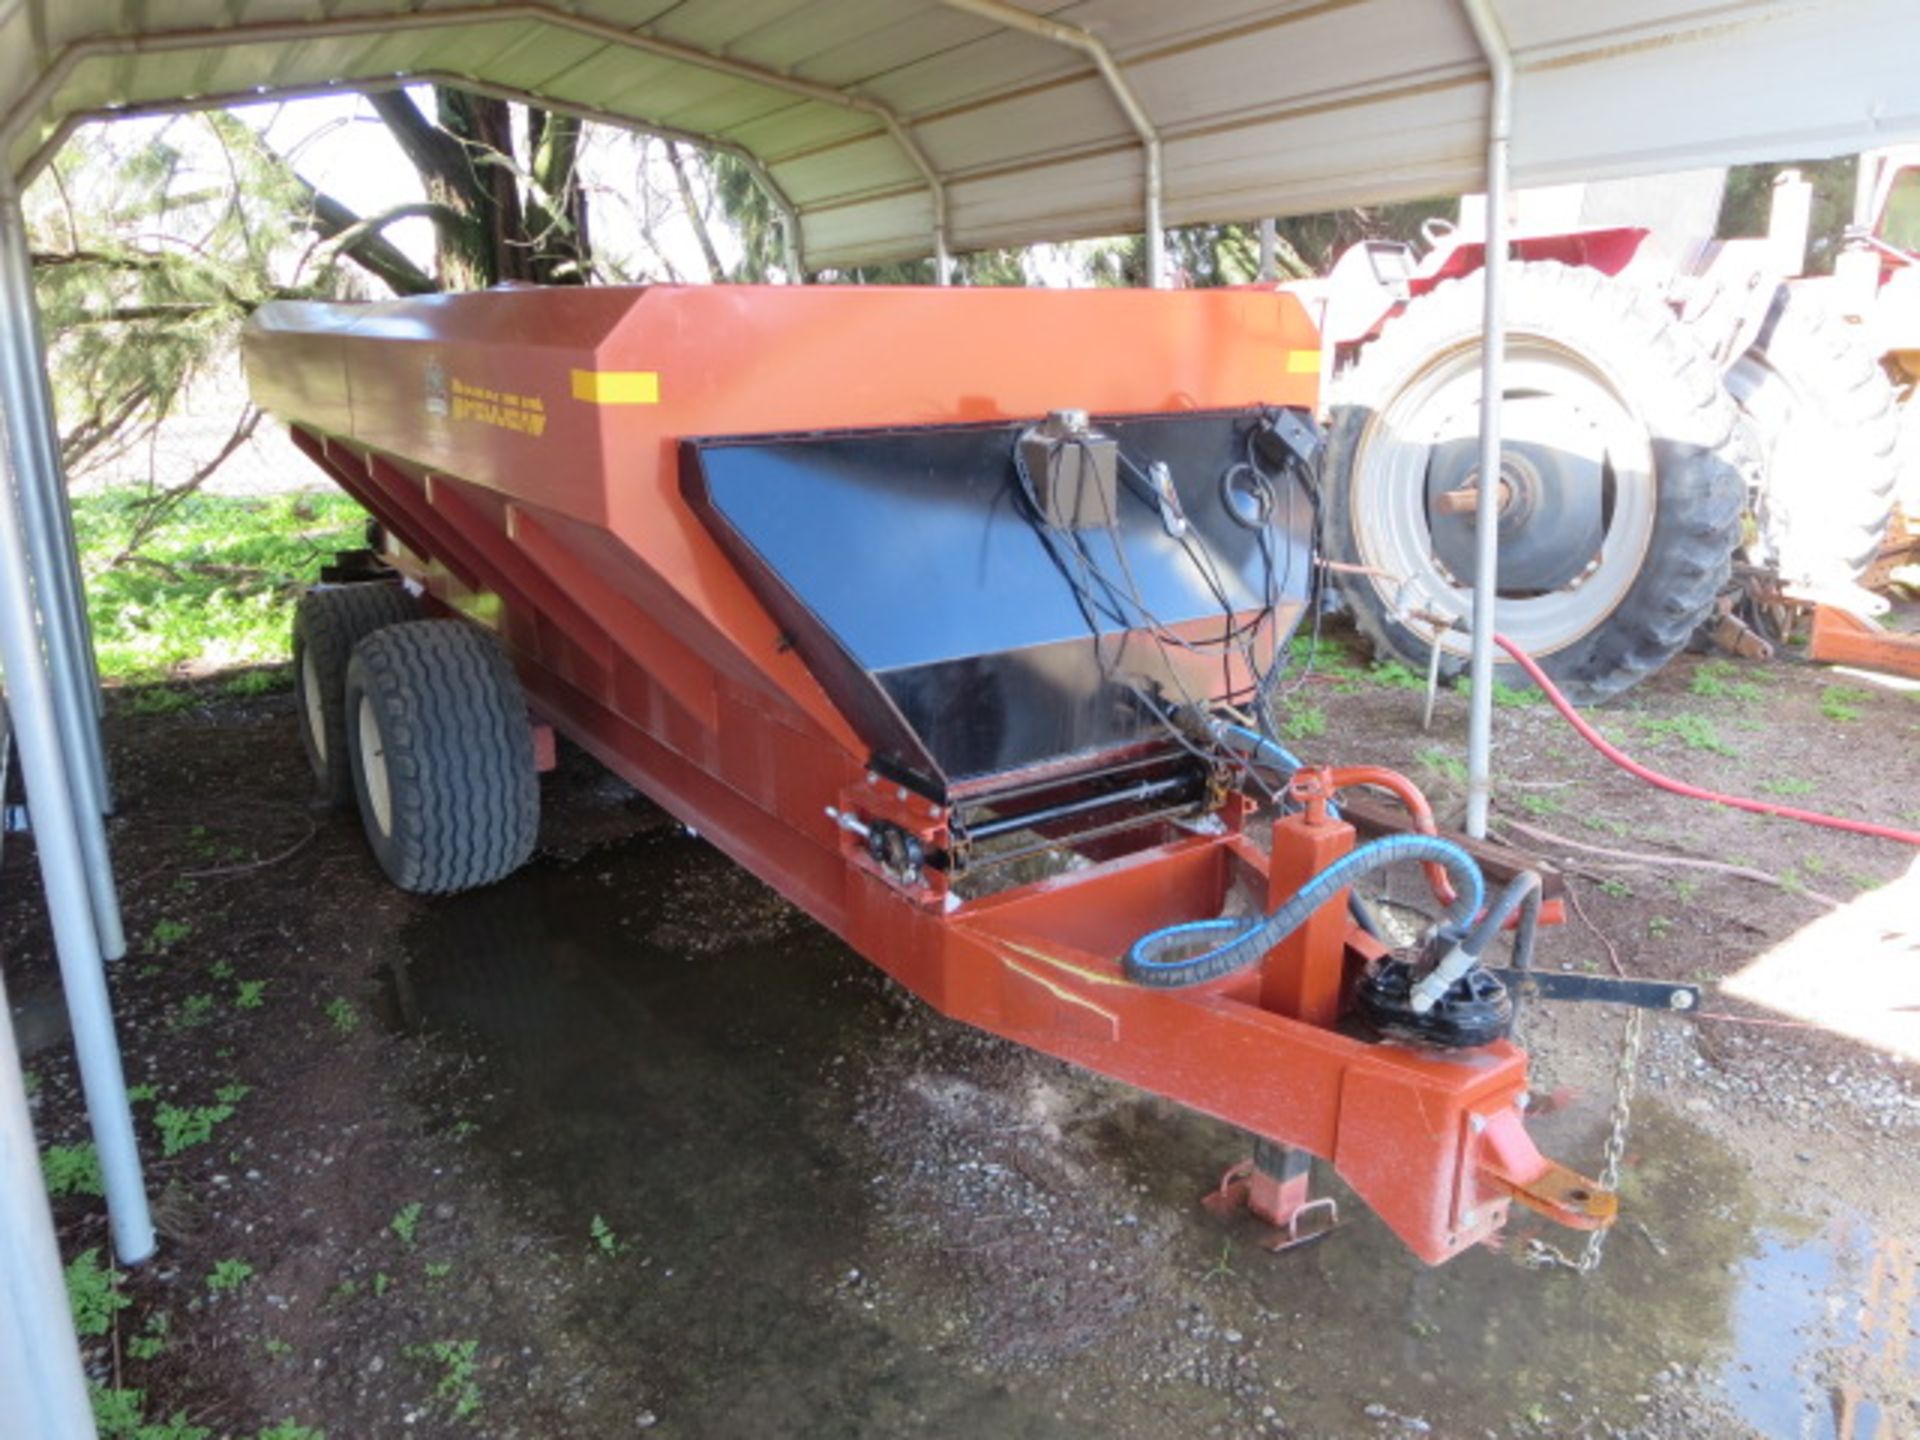 2016 Pequea Orchard Spreader Model LPV12G S/N 240; sale is subject to confirmation - Image 2 of 15